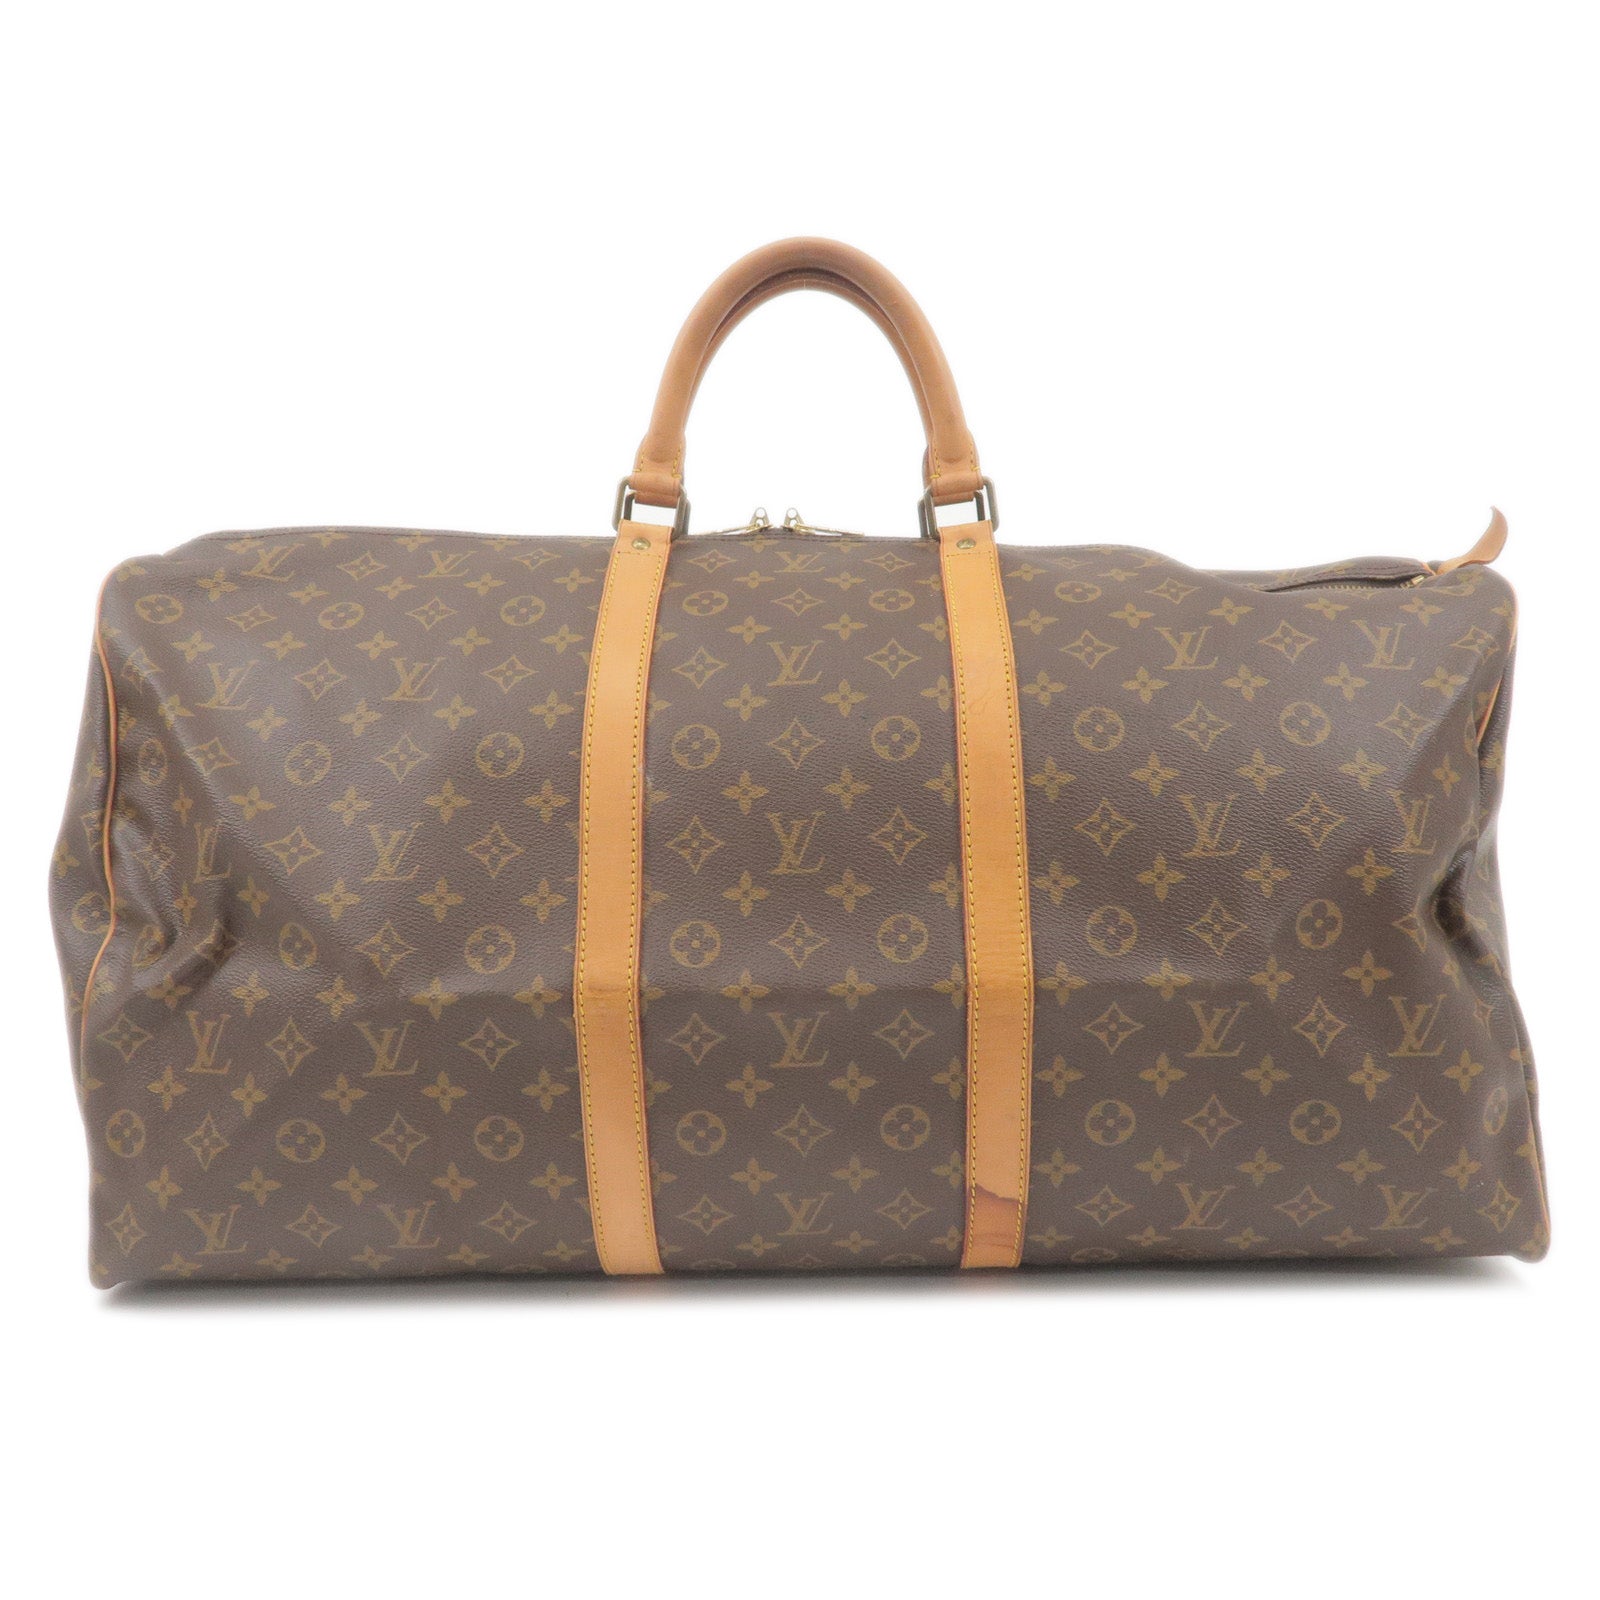 Louis Vuitton Keepall 2023 Ad Campaign Review